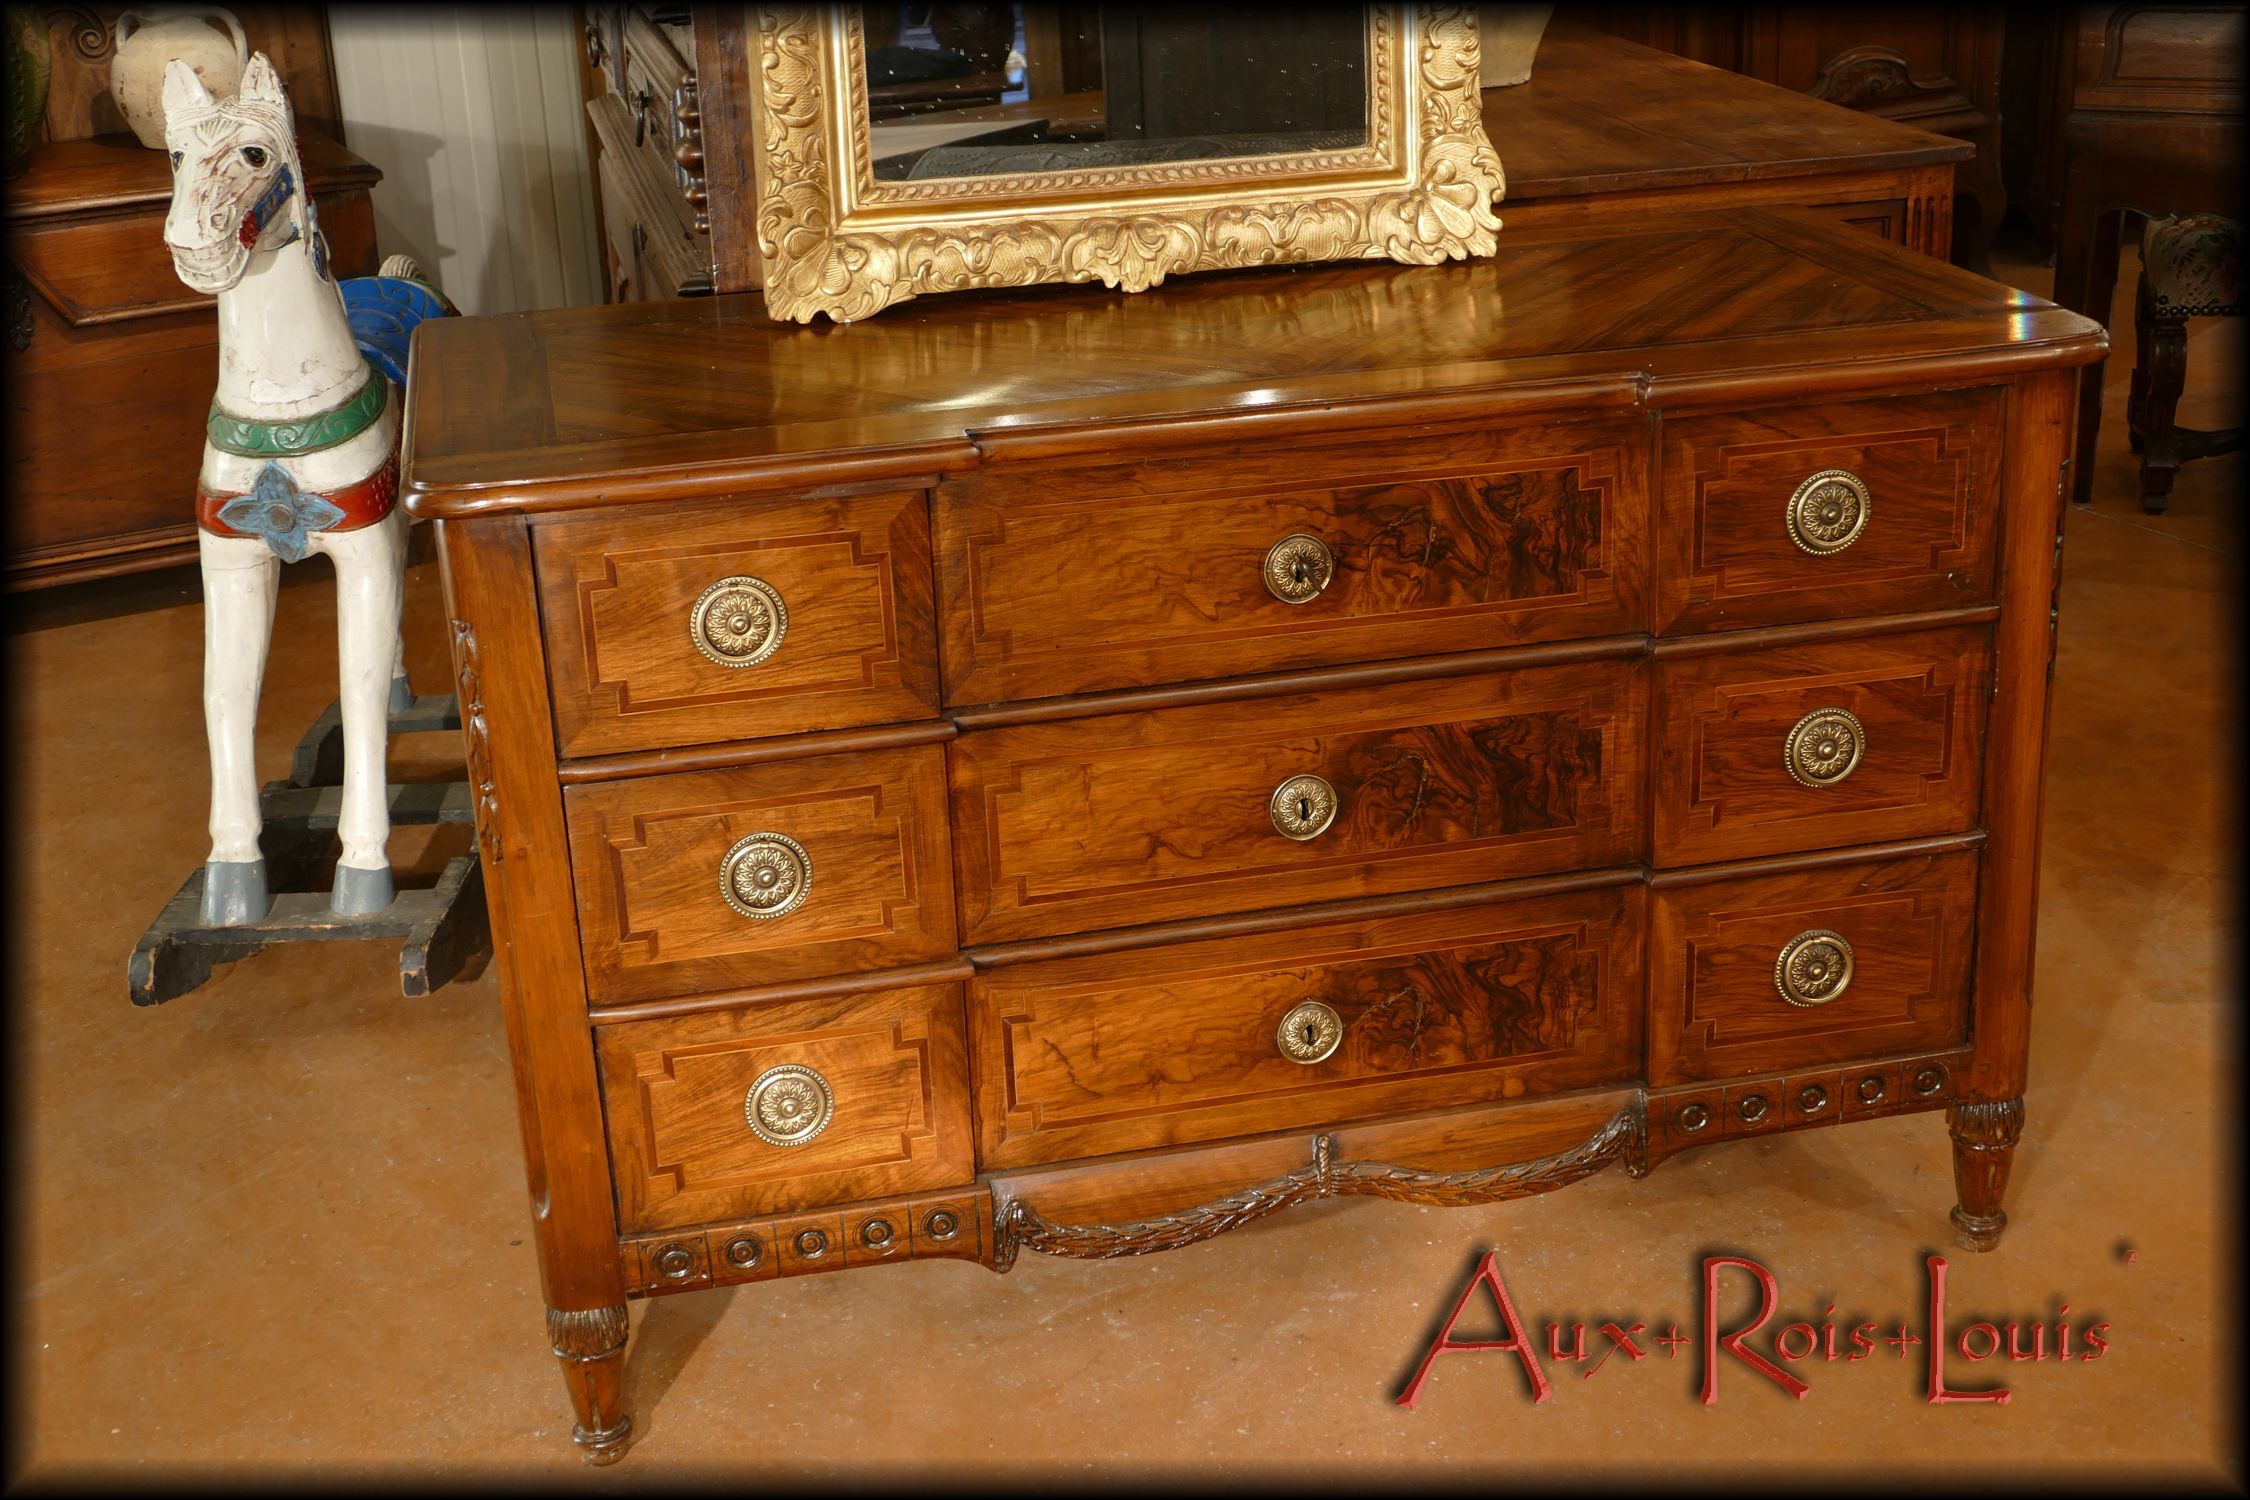 Walnut chest of drawers with clean and slender lines typical of the Louis XVI style